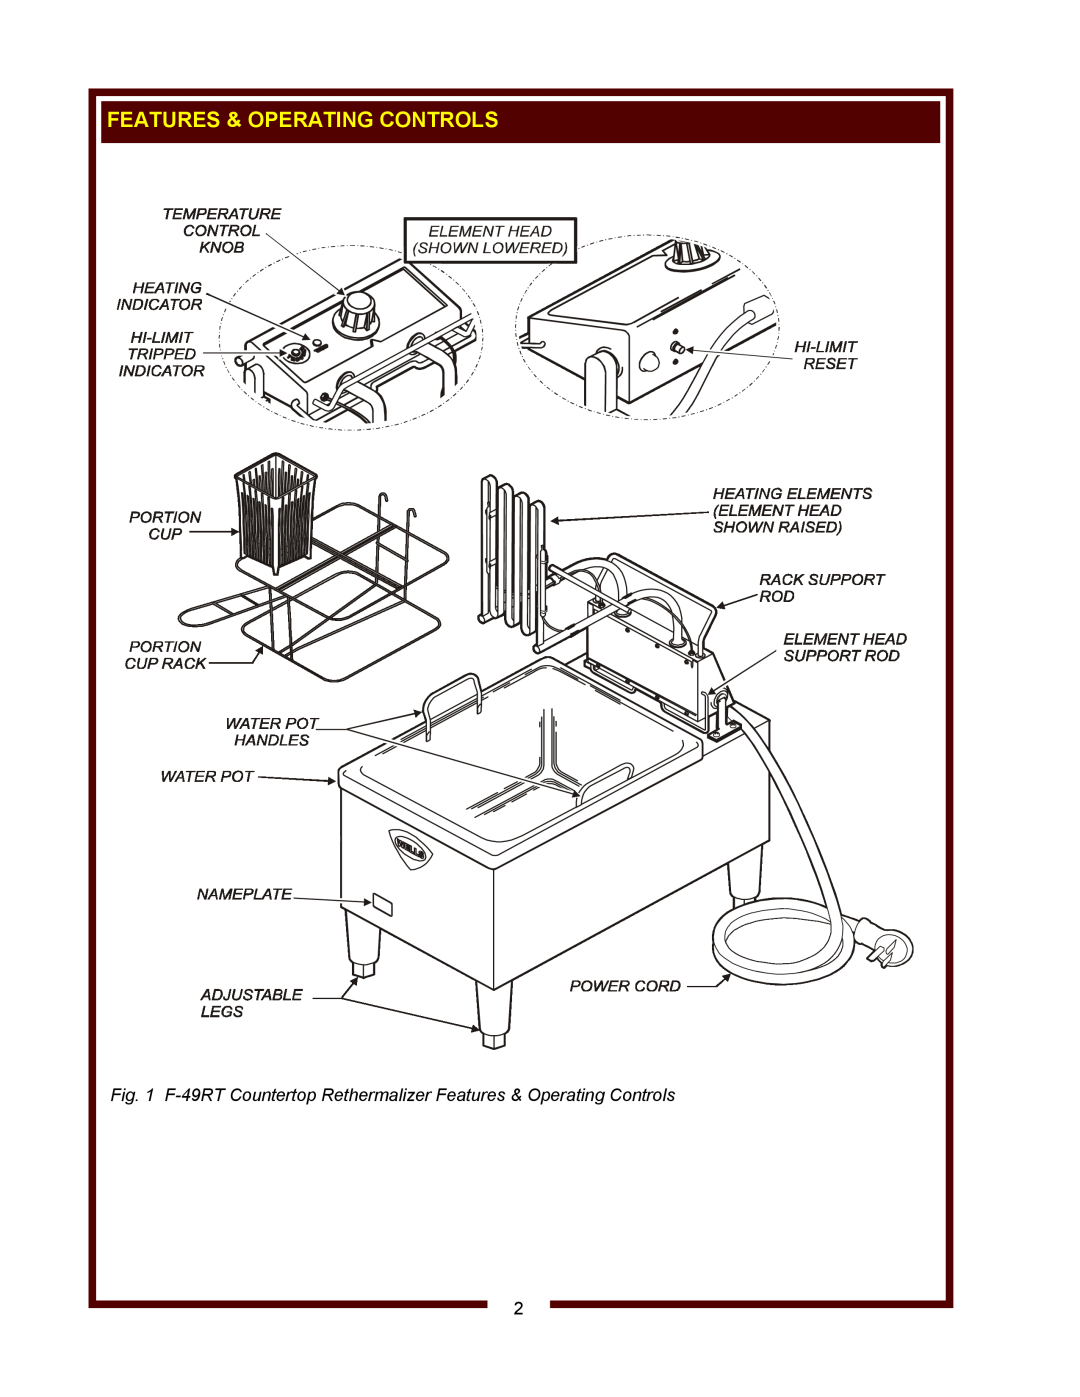 Wells operation manual F-49RT Countertop Rethermalizer Features & Operating Controls 